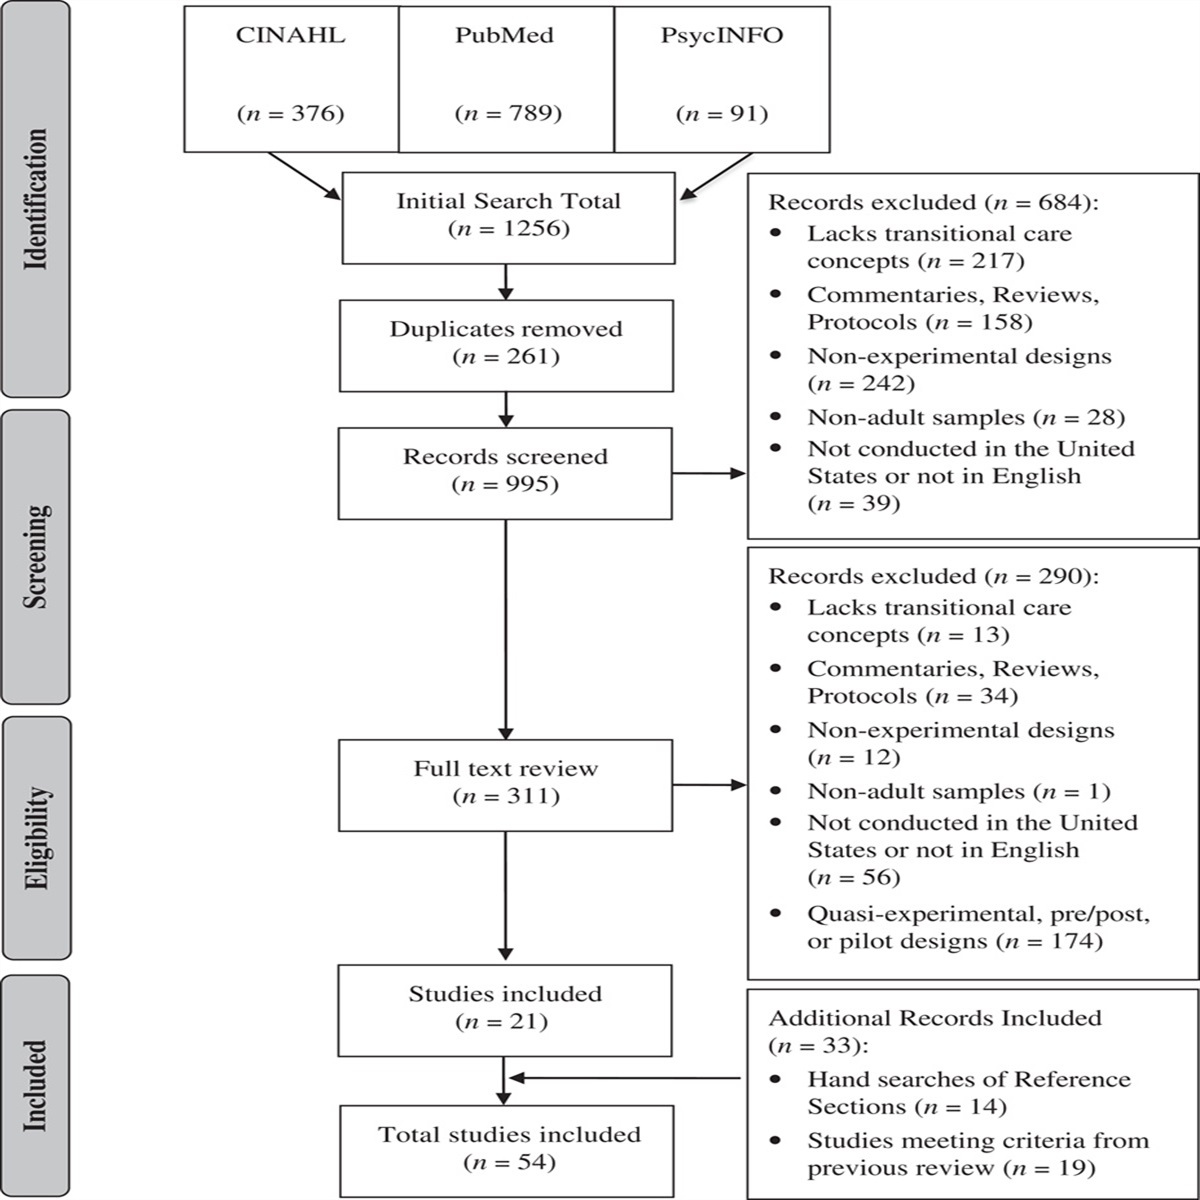 Caregiver Engagement Enhances Outcomes Among Randomized Control Trials of Transitional Care Interventions: A Systematic Review and Meta-analysis